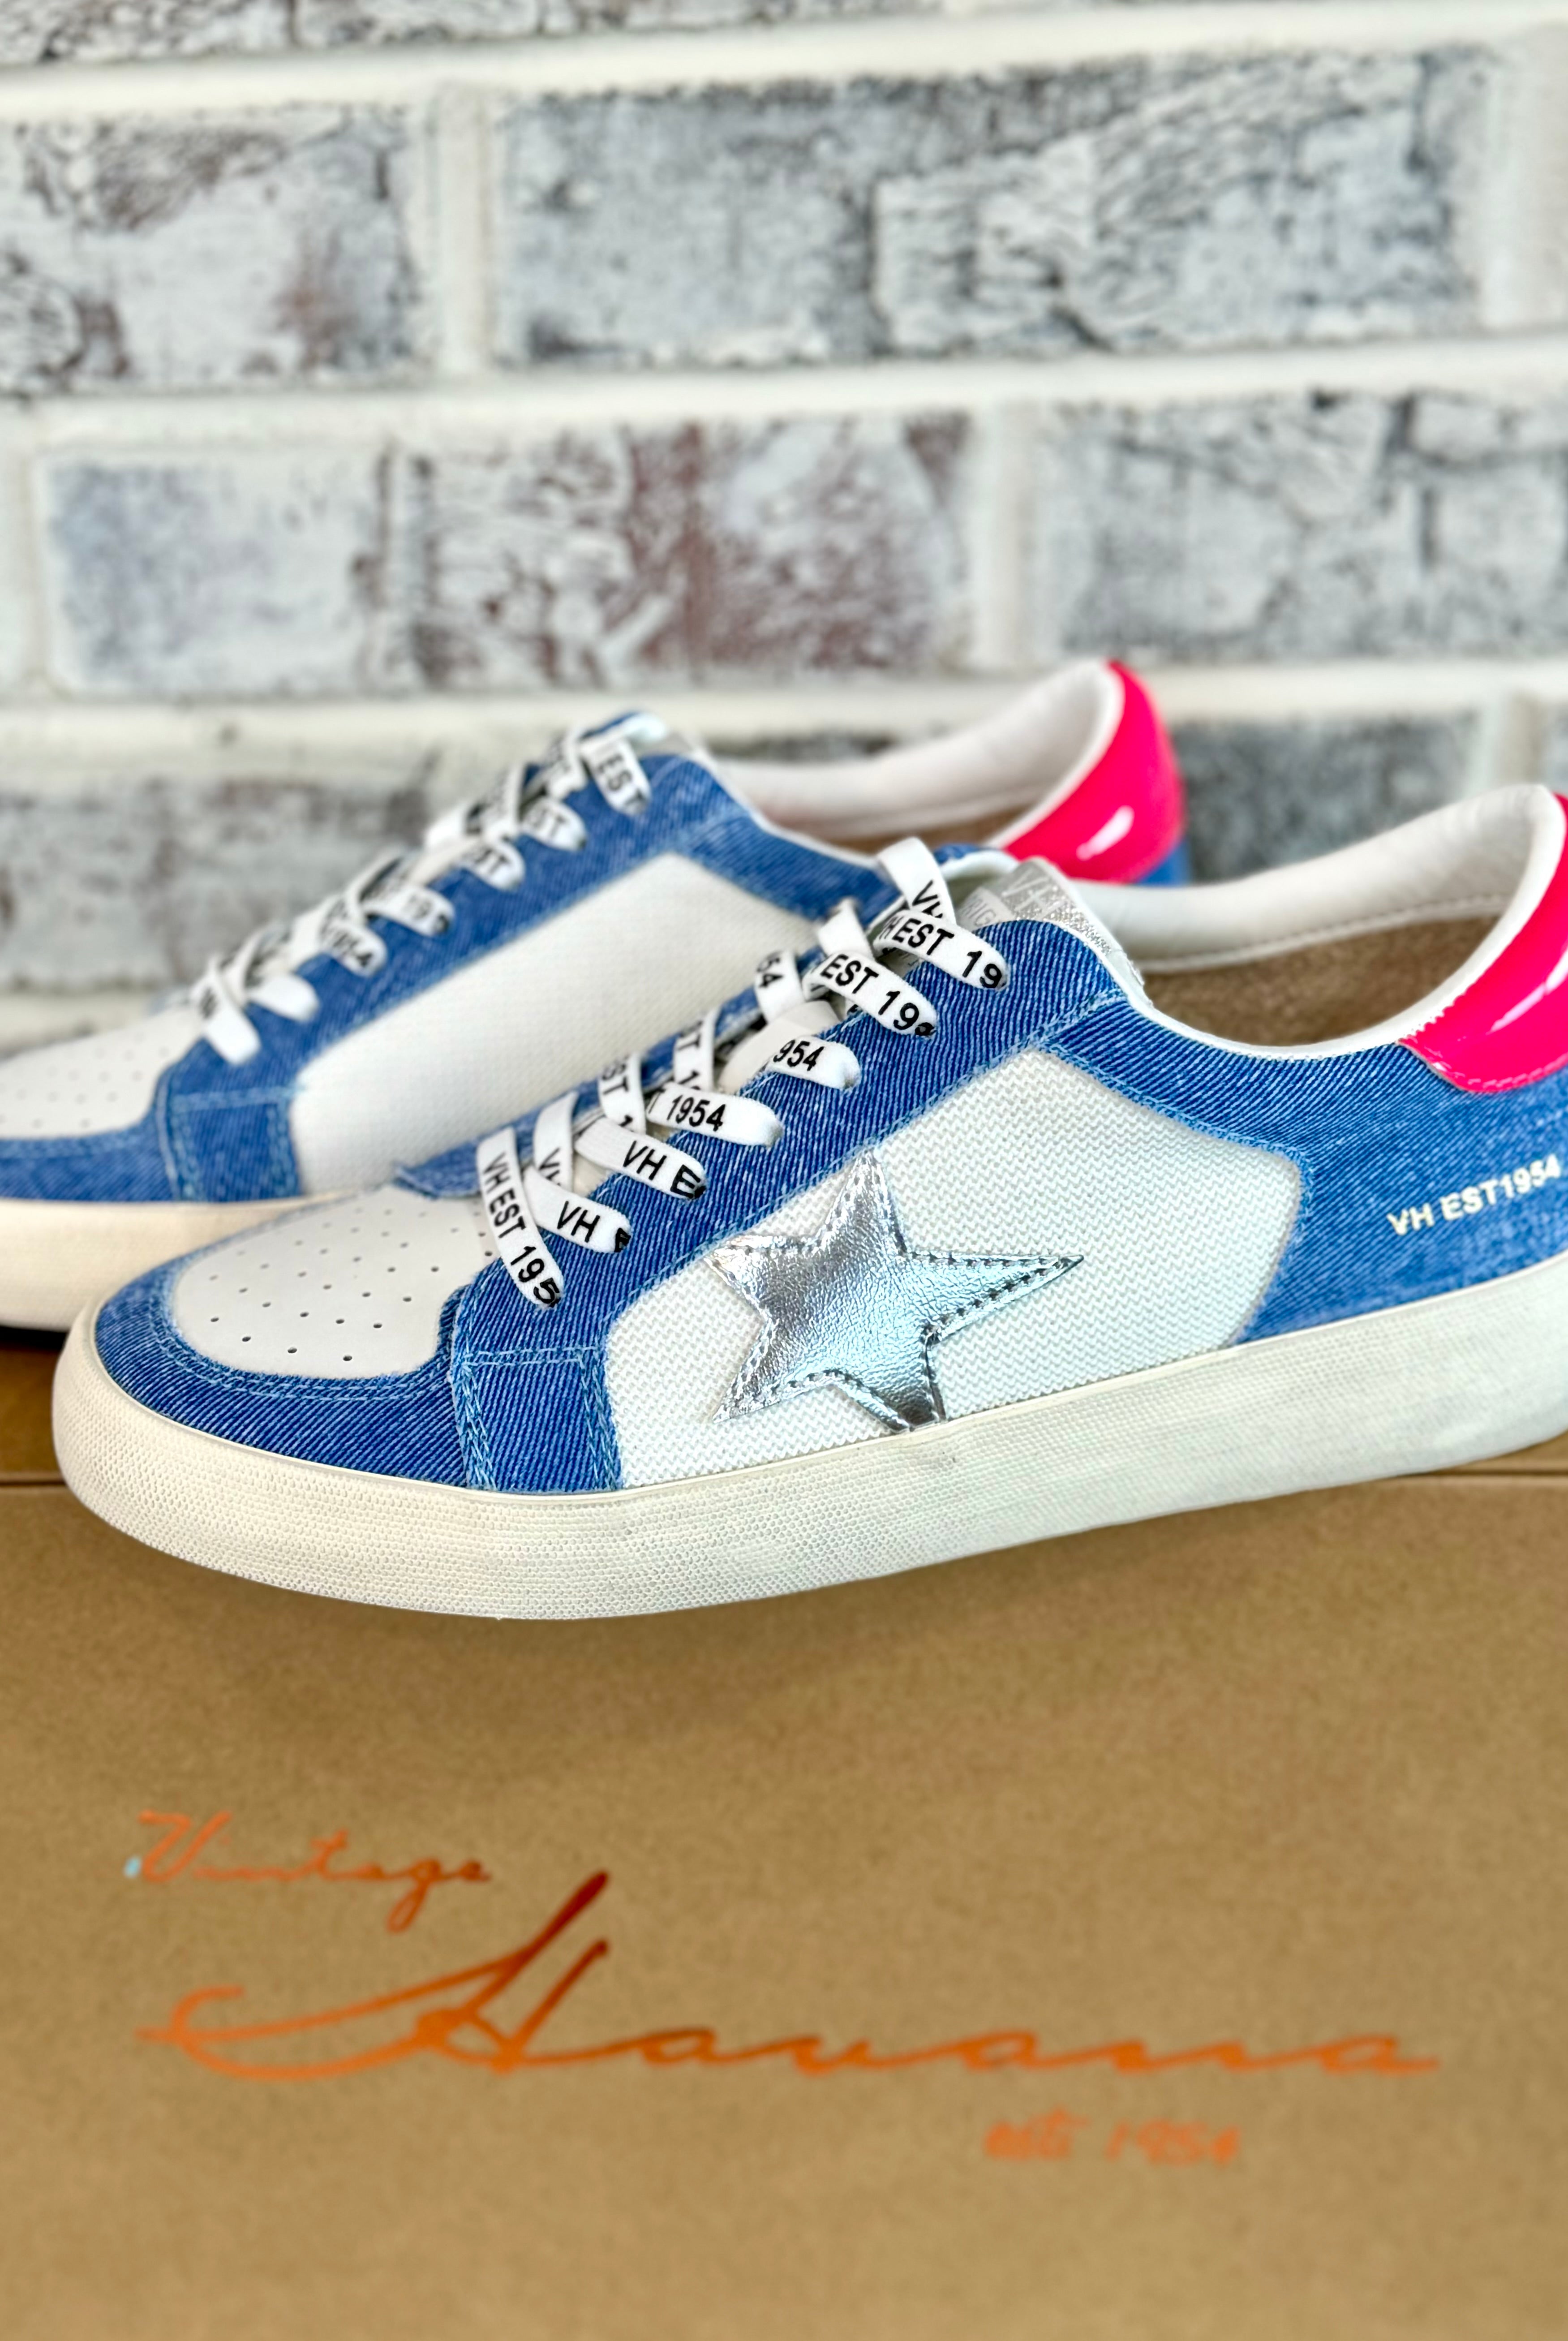 Summer Fun VH Sneakers-shoes-The Lovely Closet-The Lovely Closet, Women's Fashion Boutique in Alexandria, KY